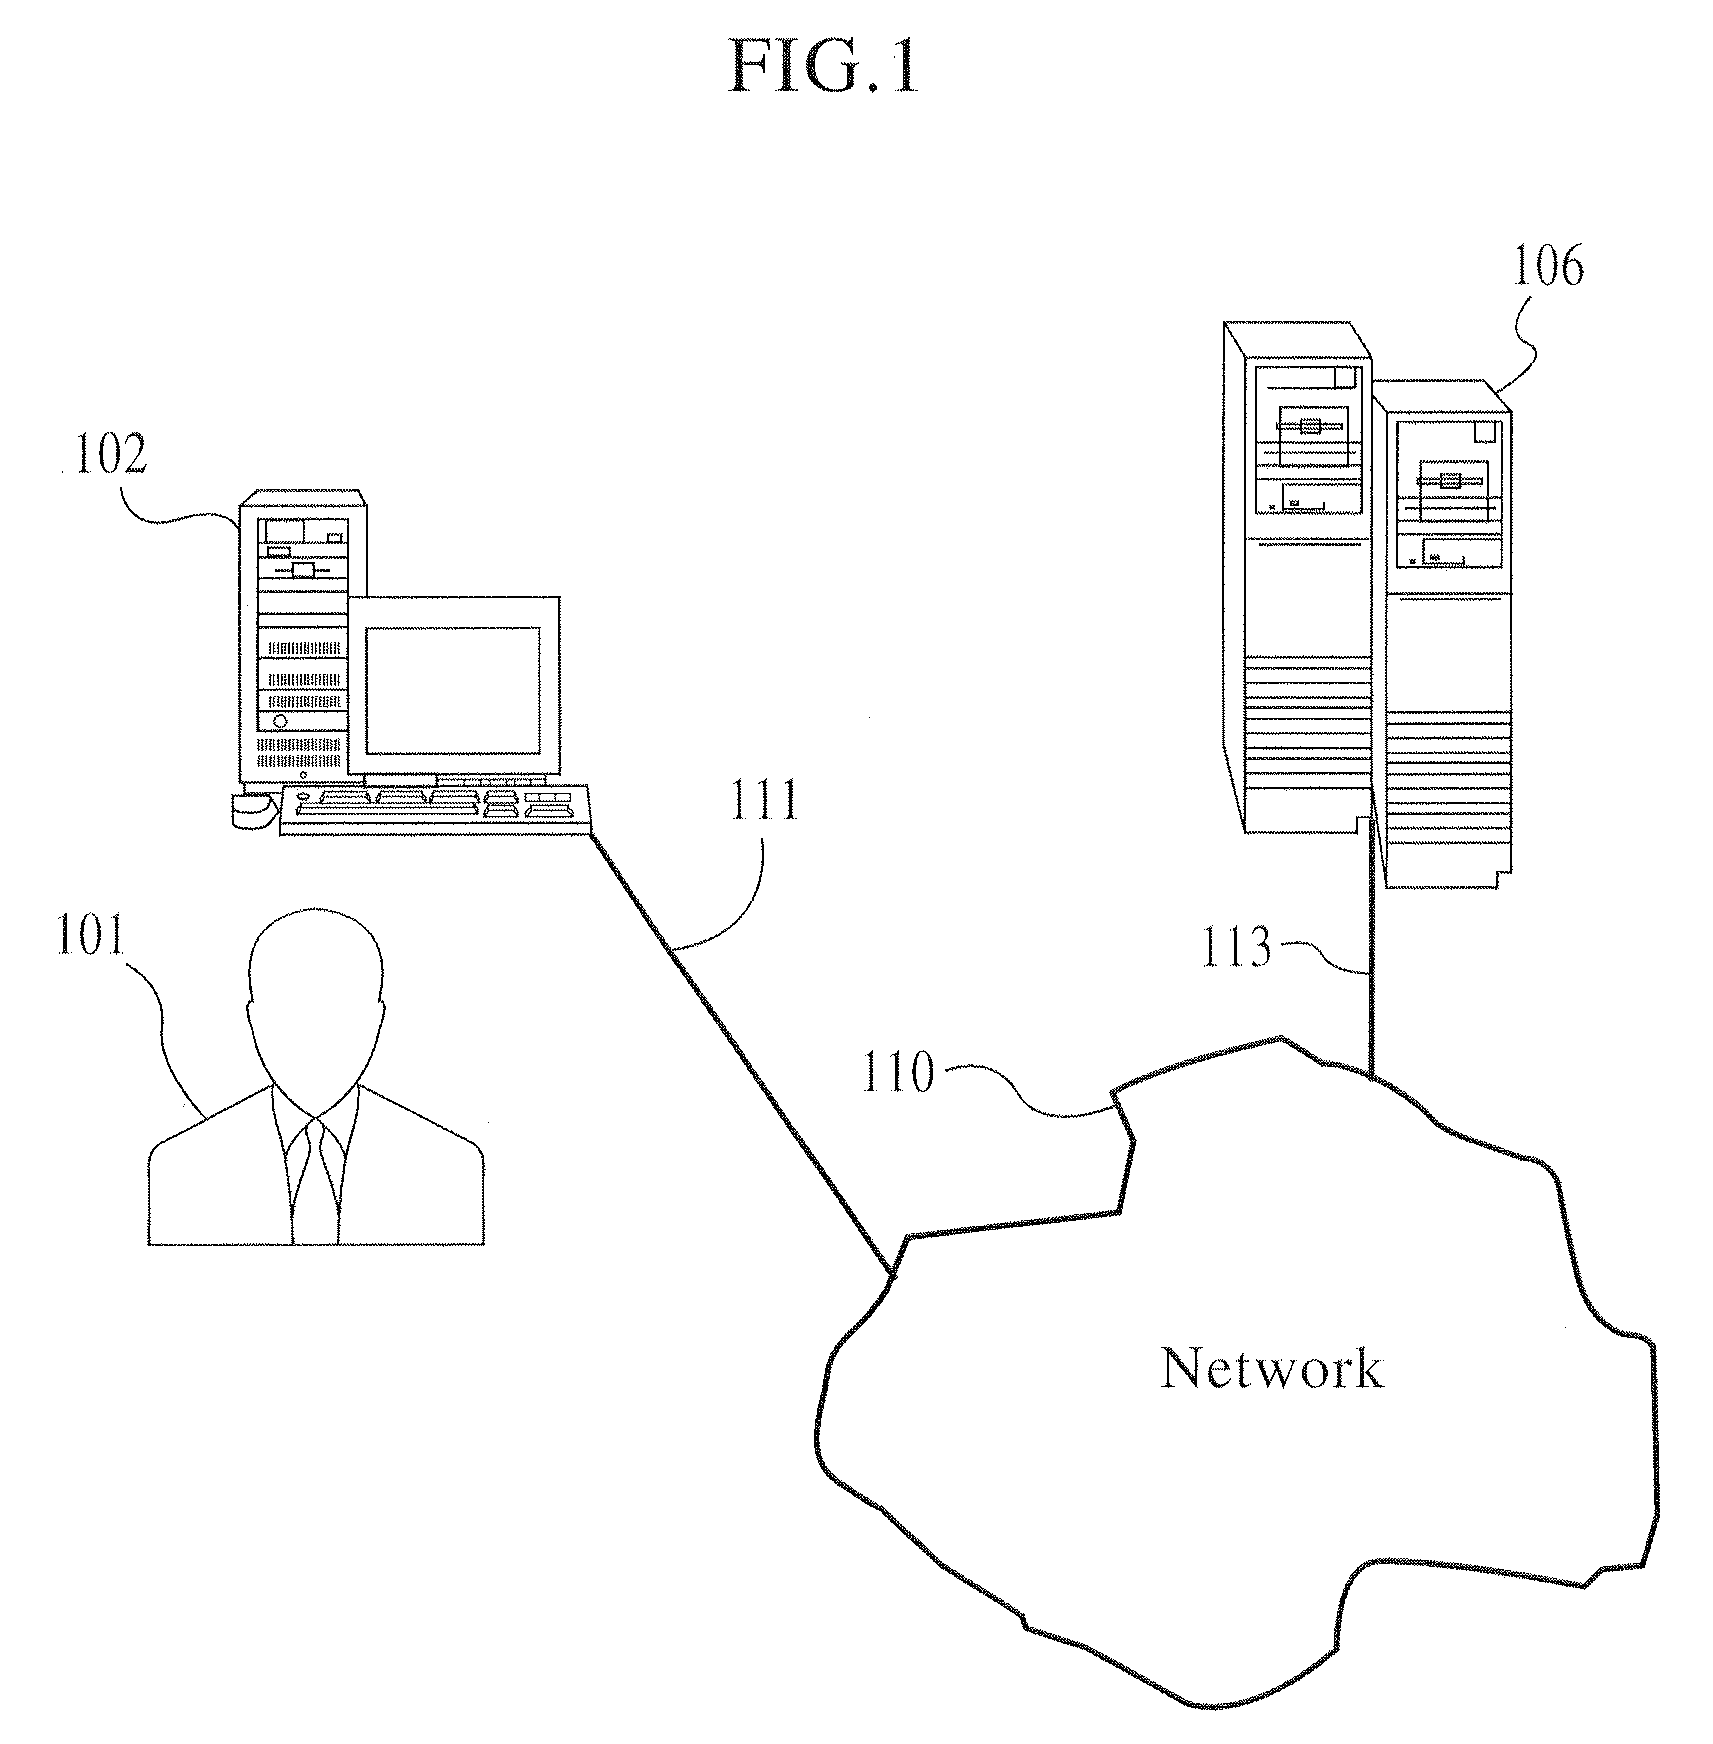 Content based image retrieval system, computer program product, and method of use